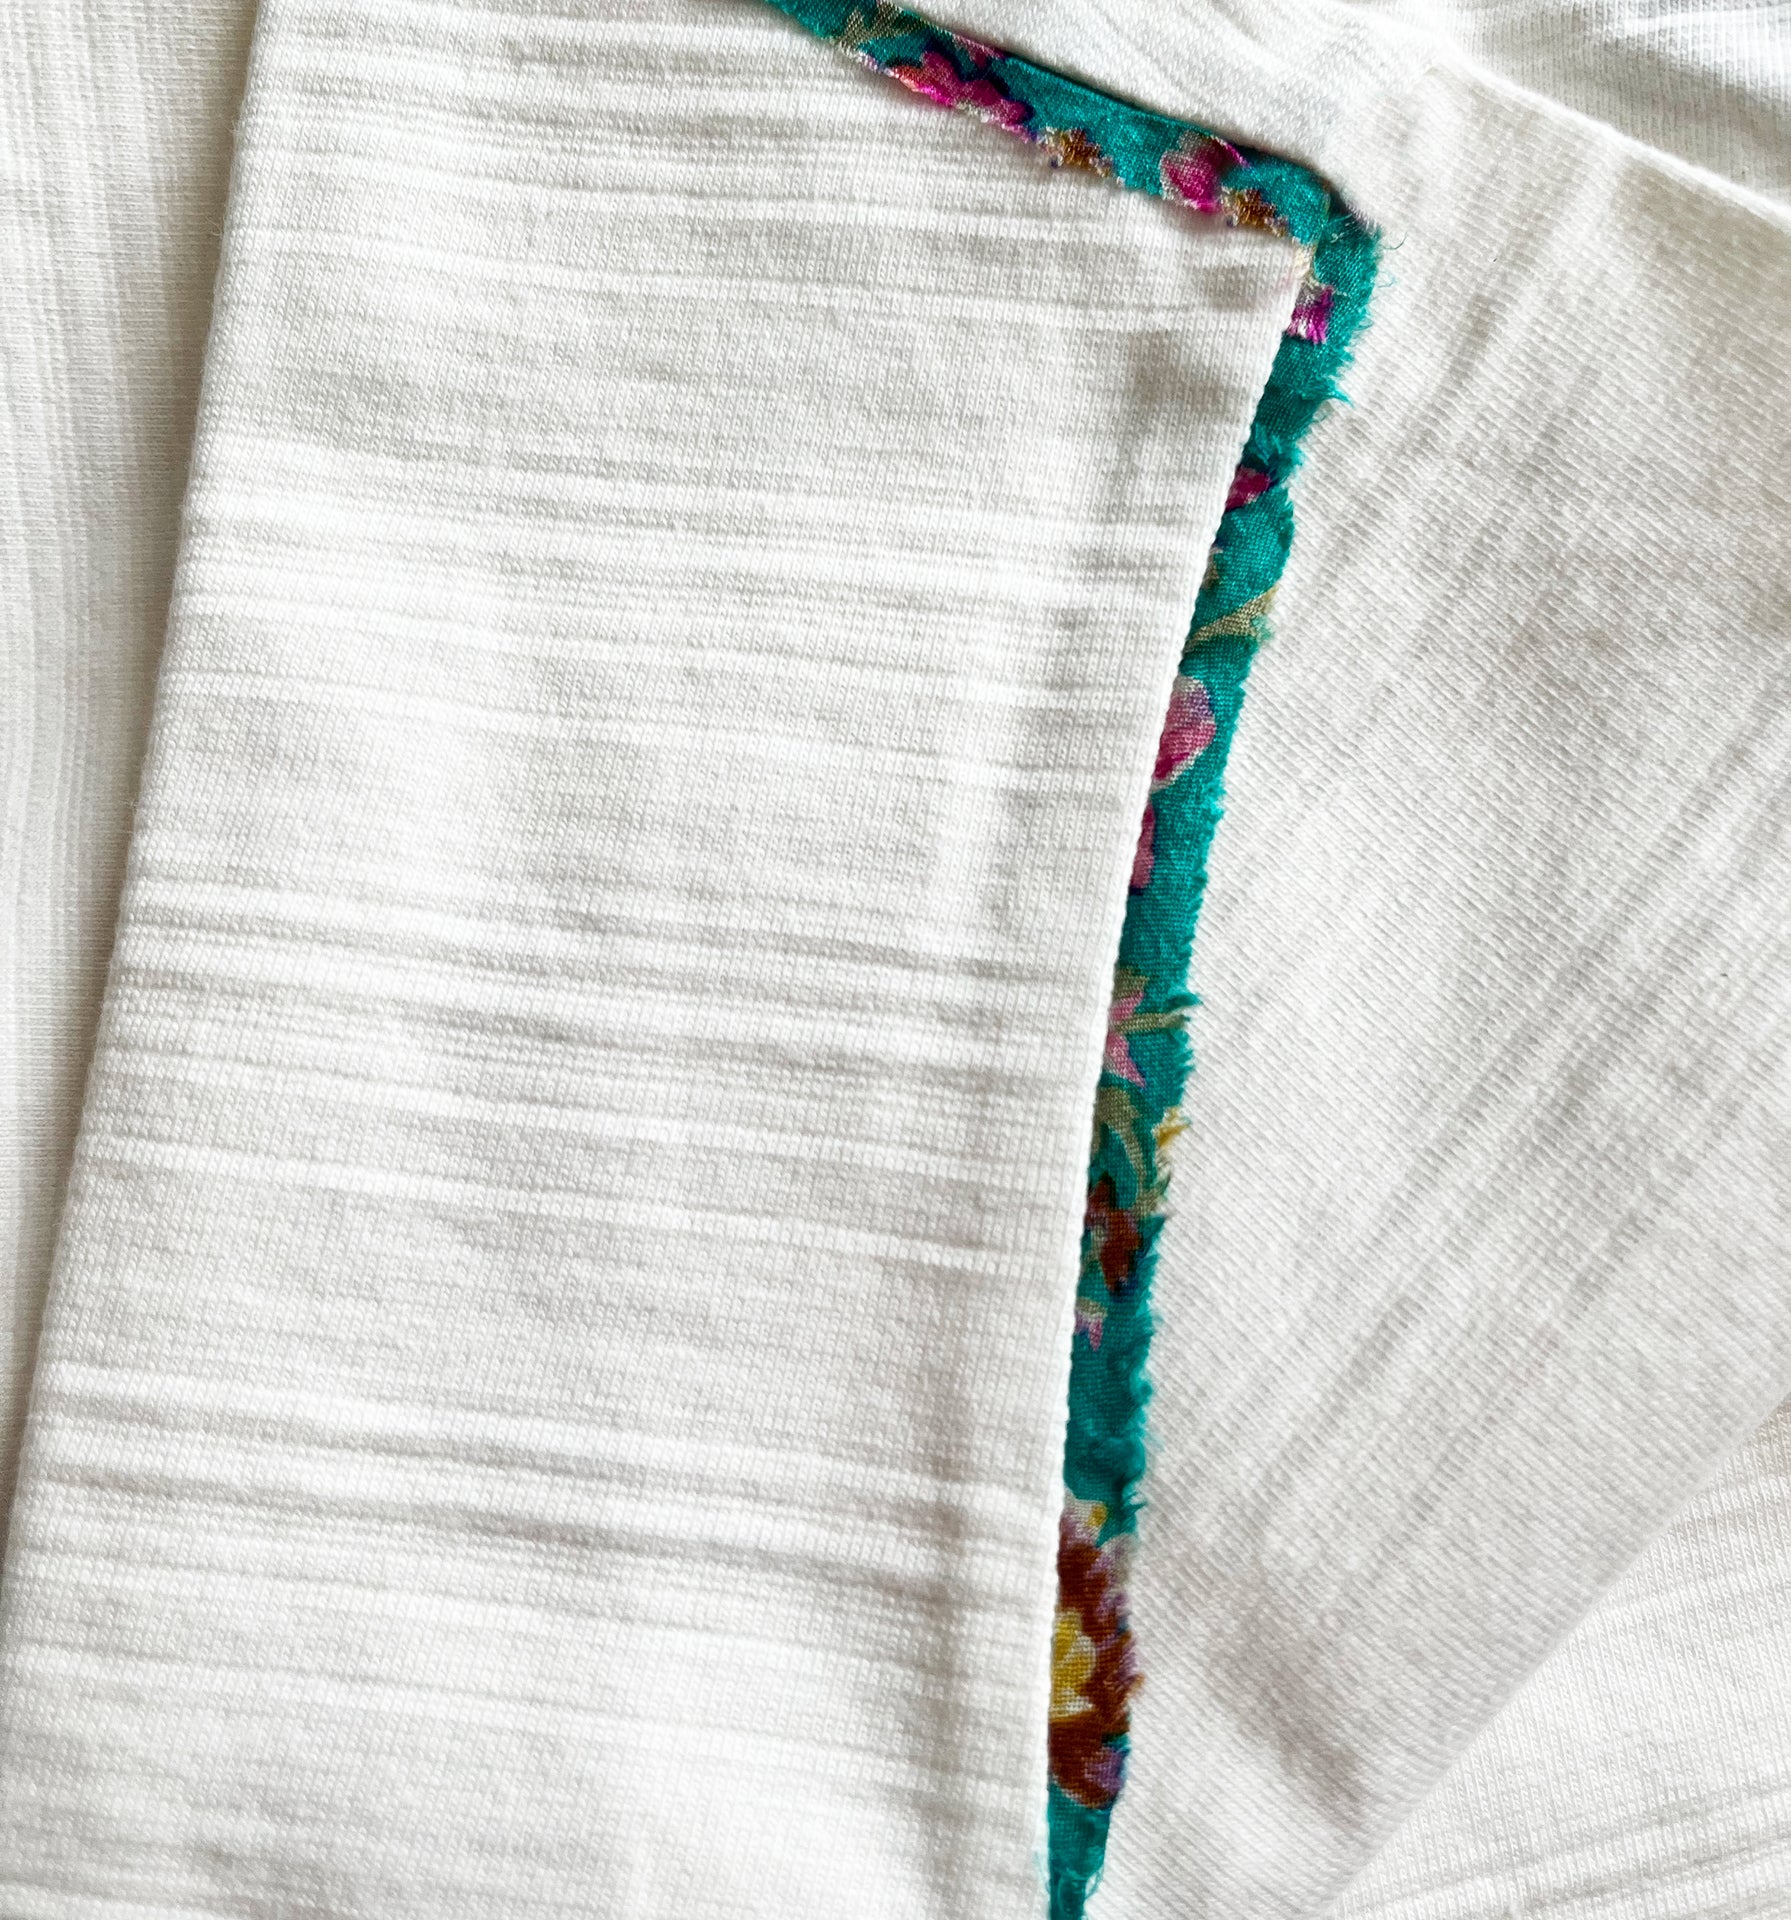 Quinto T-Shirt with an oversized fit and 'Calabria-Sicilia' theme, crafted from a unique mix of organic cotton and up-cycled saree - a testament to heritage and sustainable fashion.